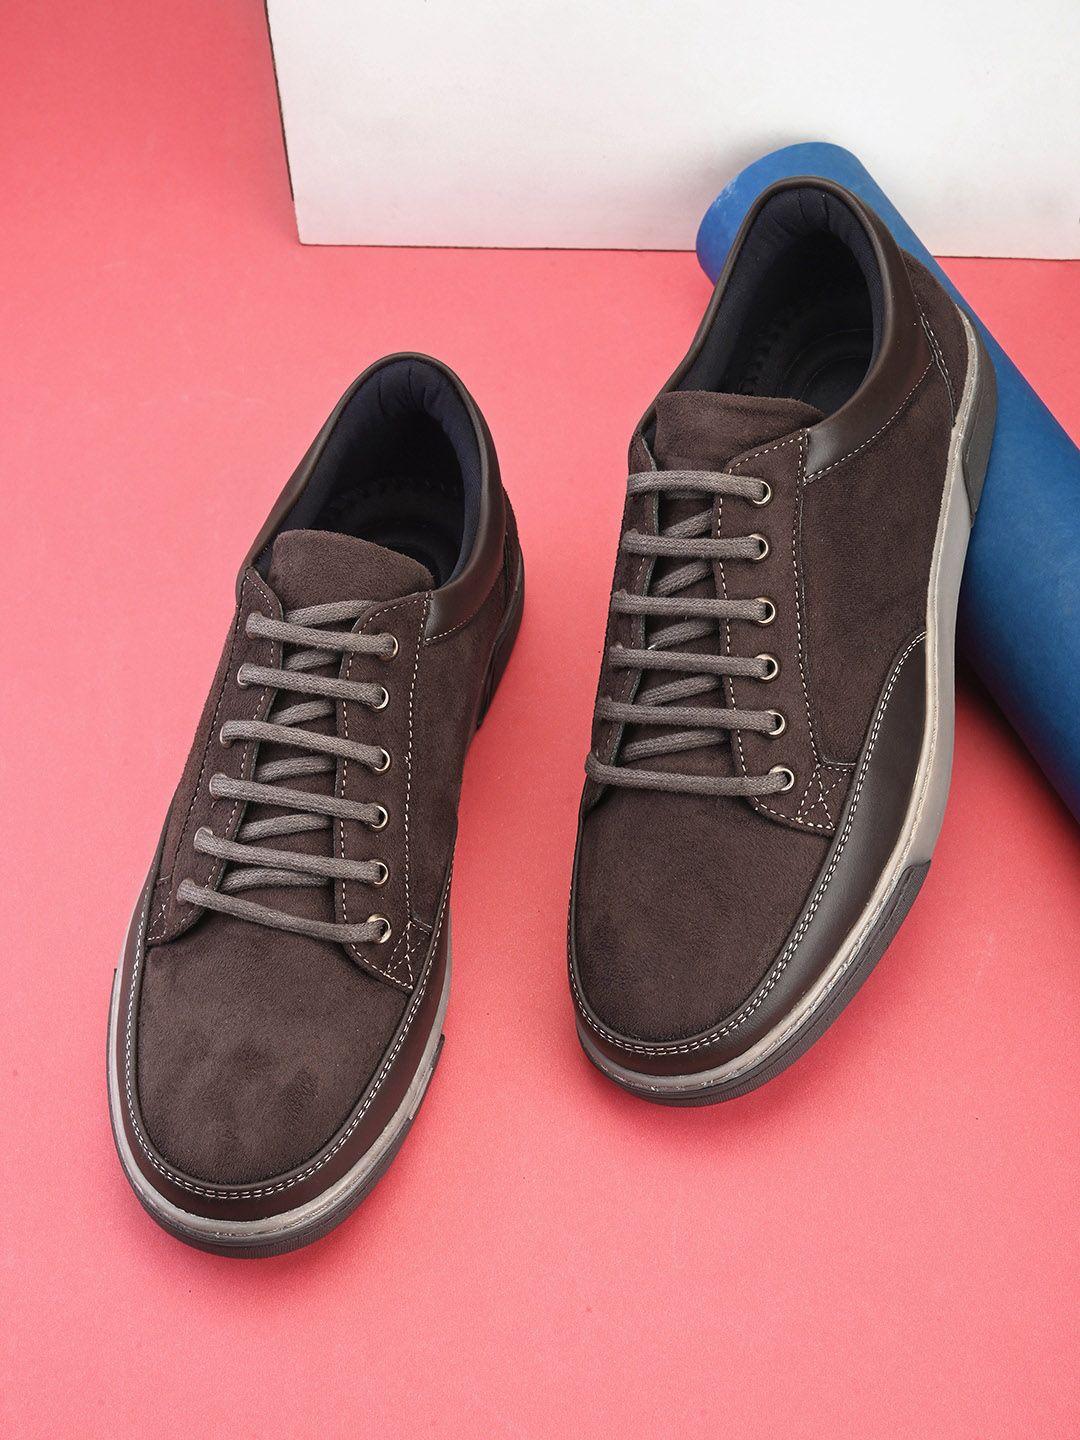 the-roadster-lifestyle-co-men-casual-sneakers